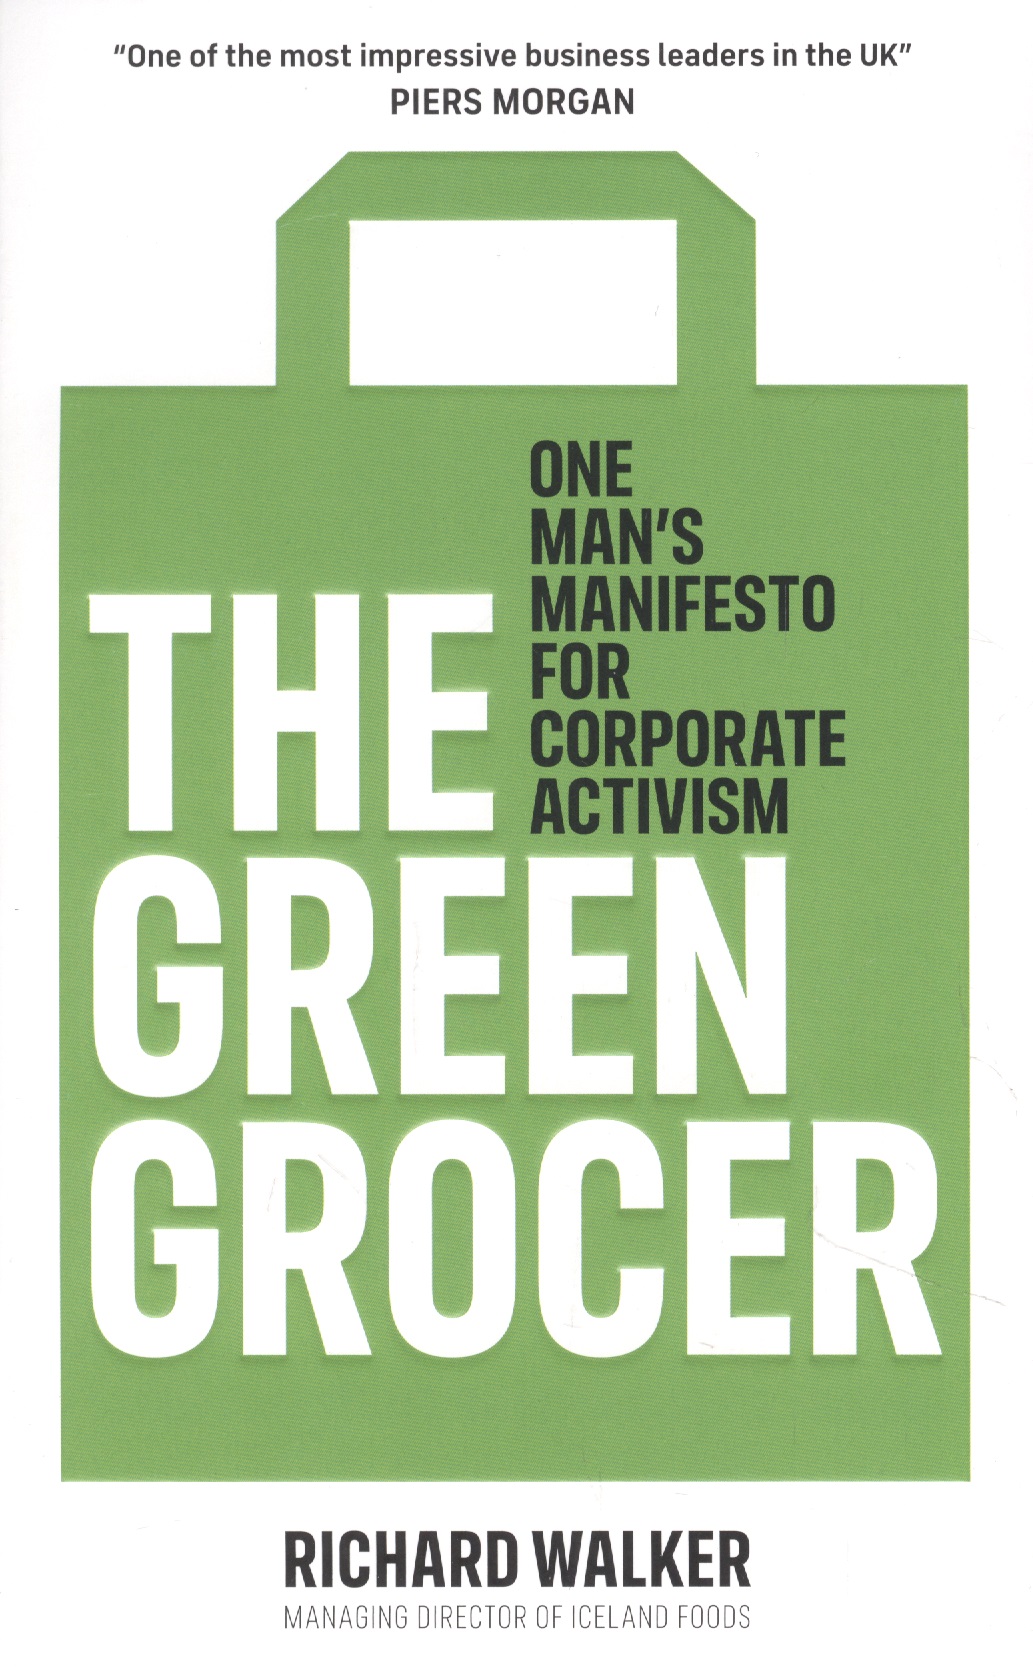 branson r business stripped bare adventures of a global entrepreneur The Green Grocer. One Mans Manifesto for Corporate Activism